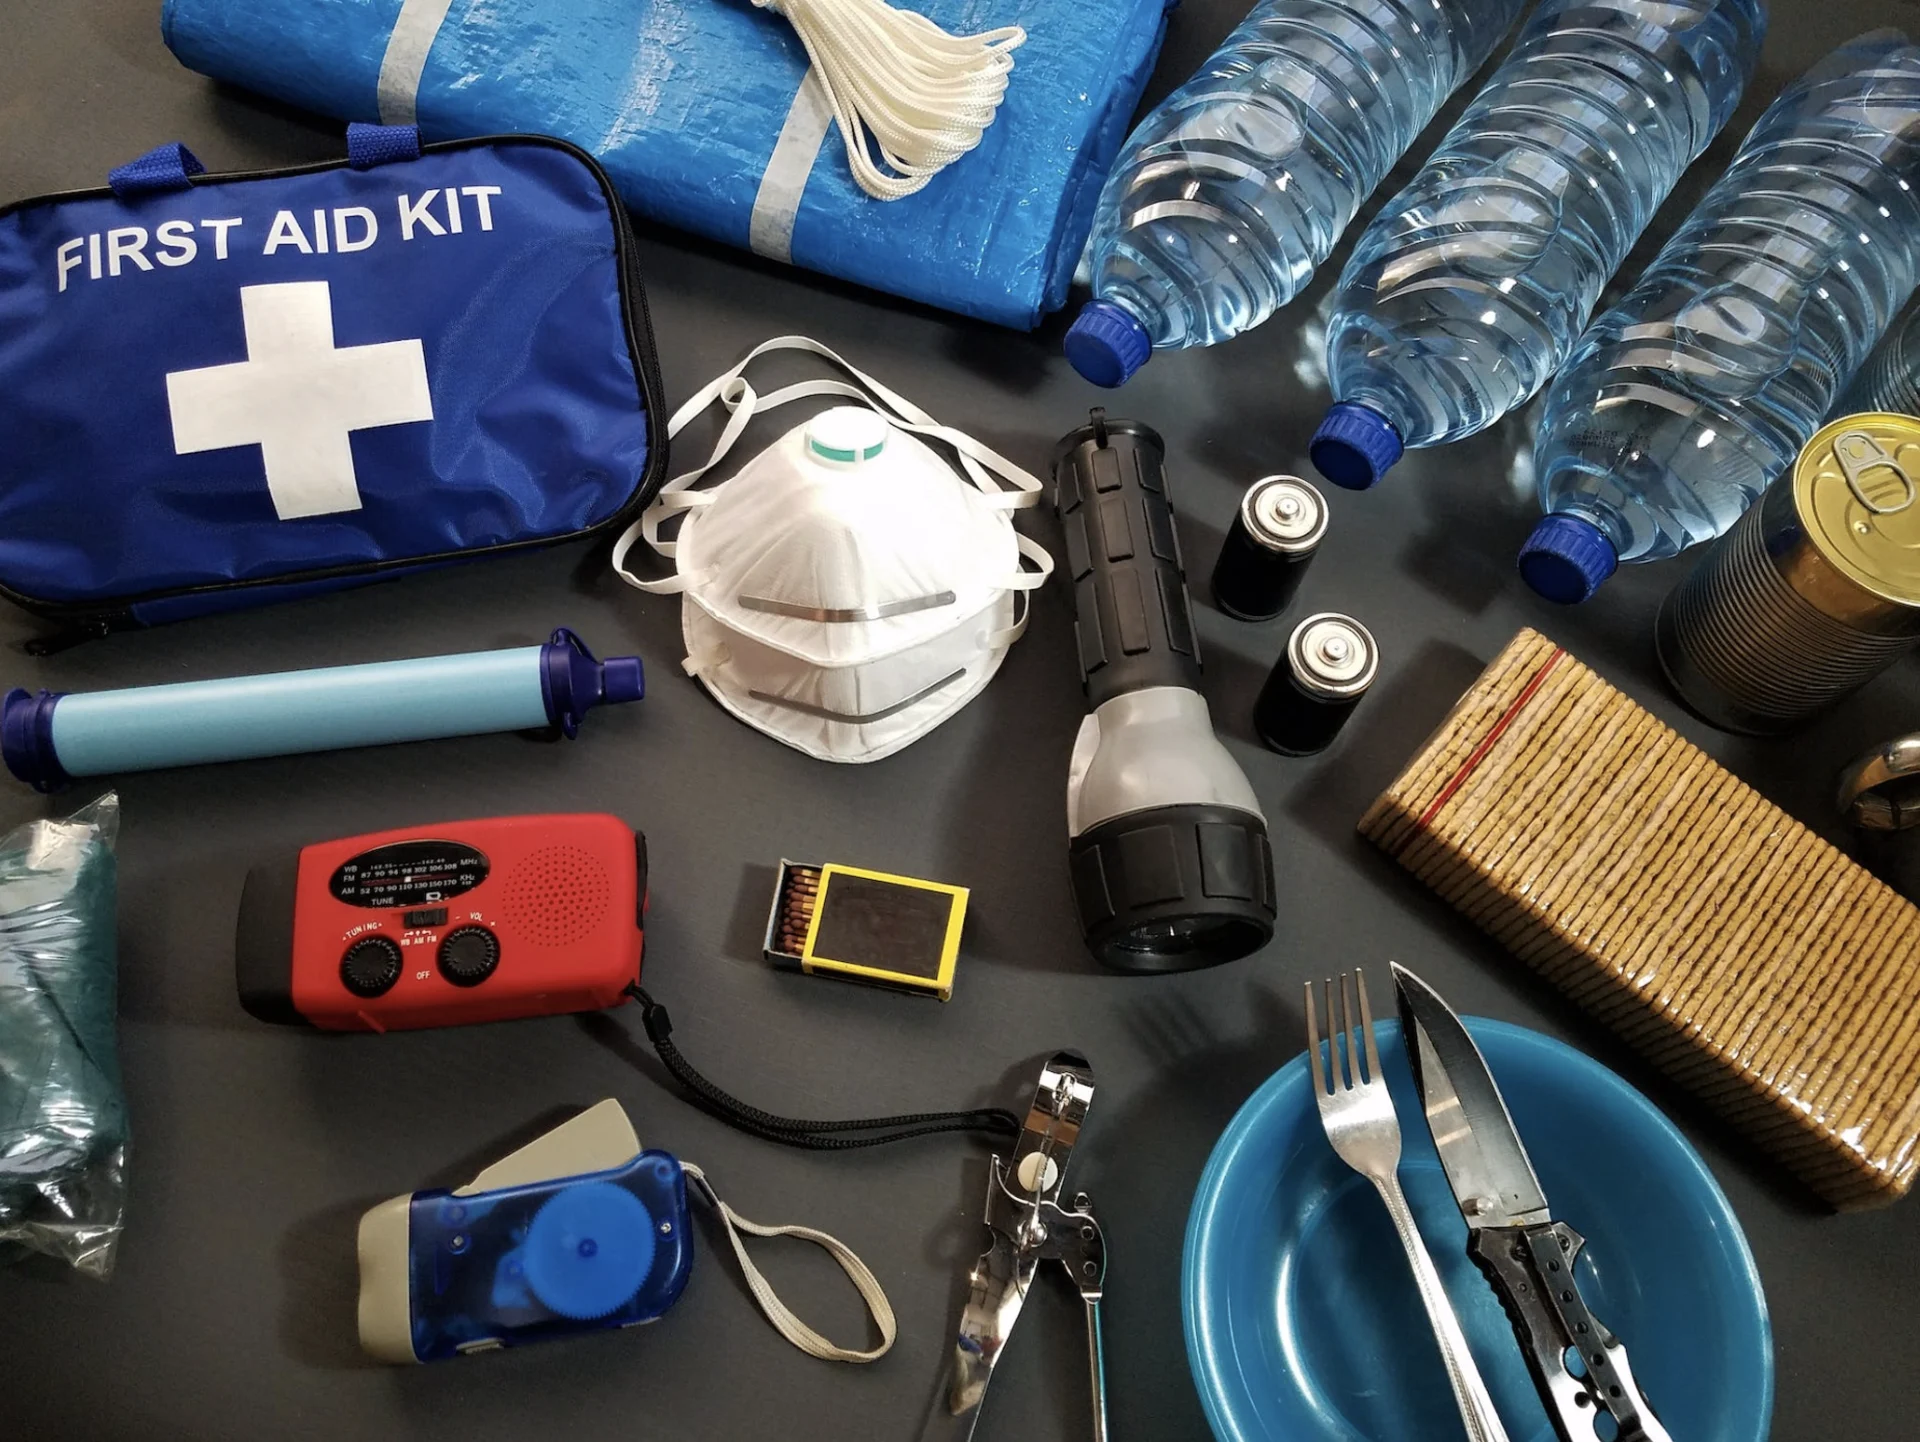 Essential items for your emergency "grab-and-go" kit